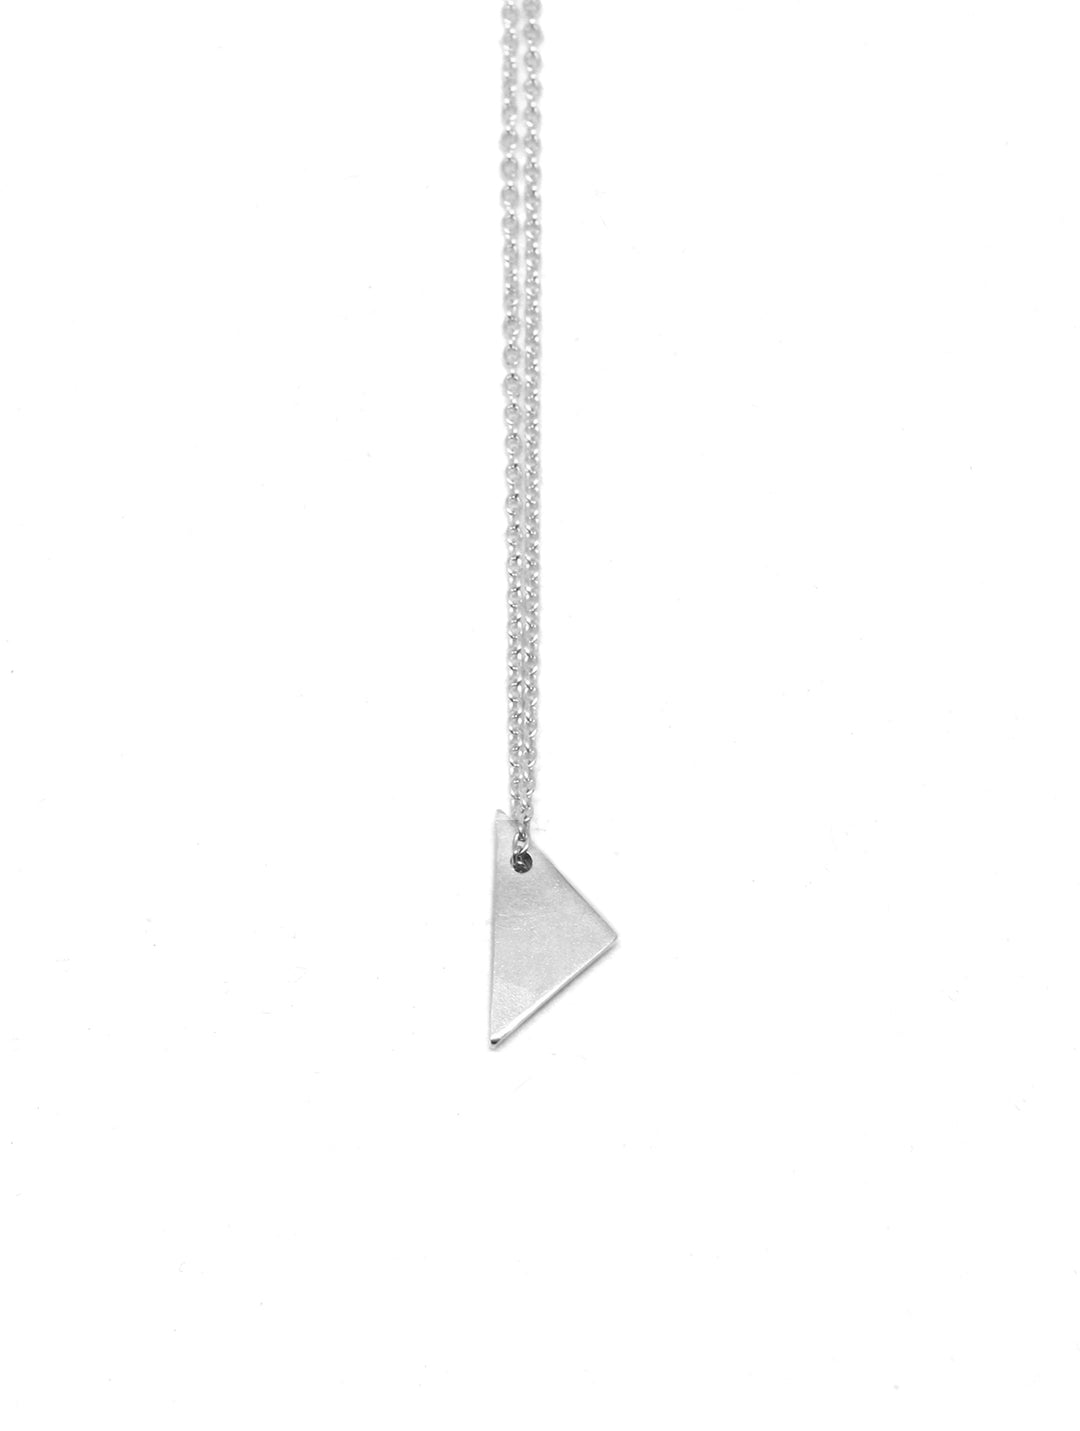 llayers jewelry necklace collier initiales gravées triangles unity 002